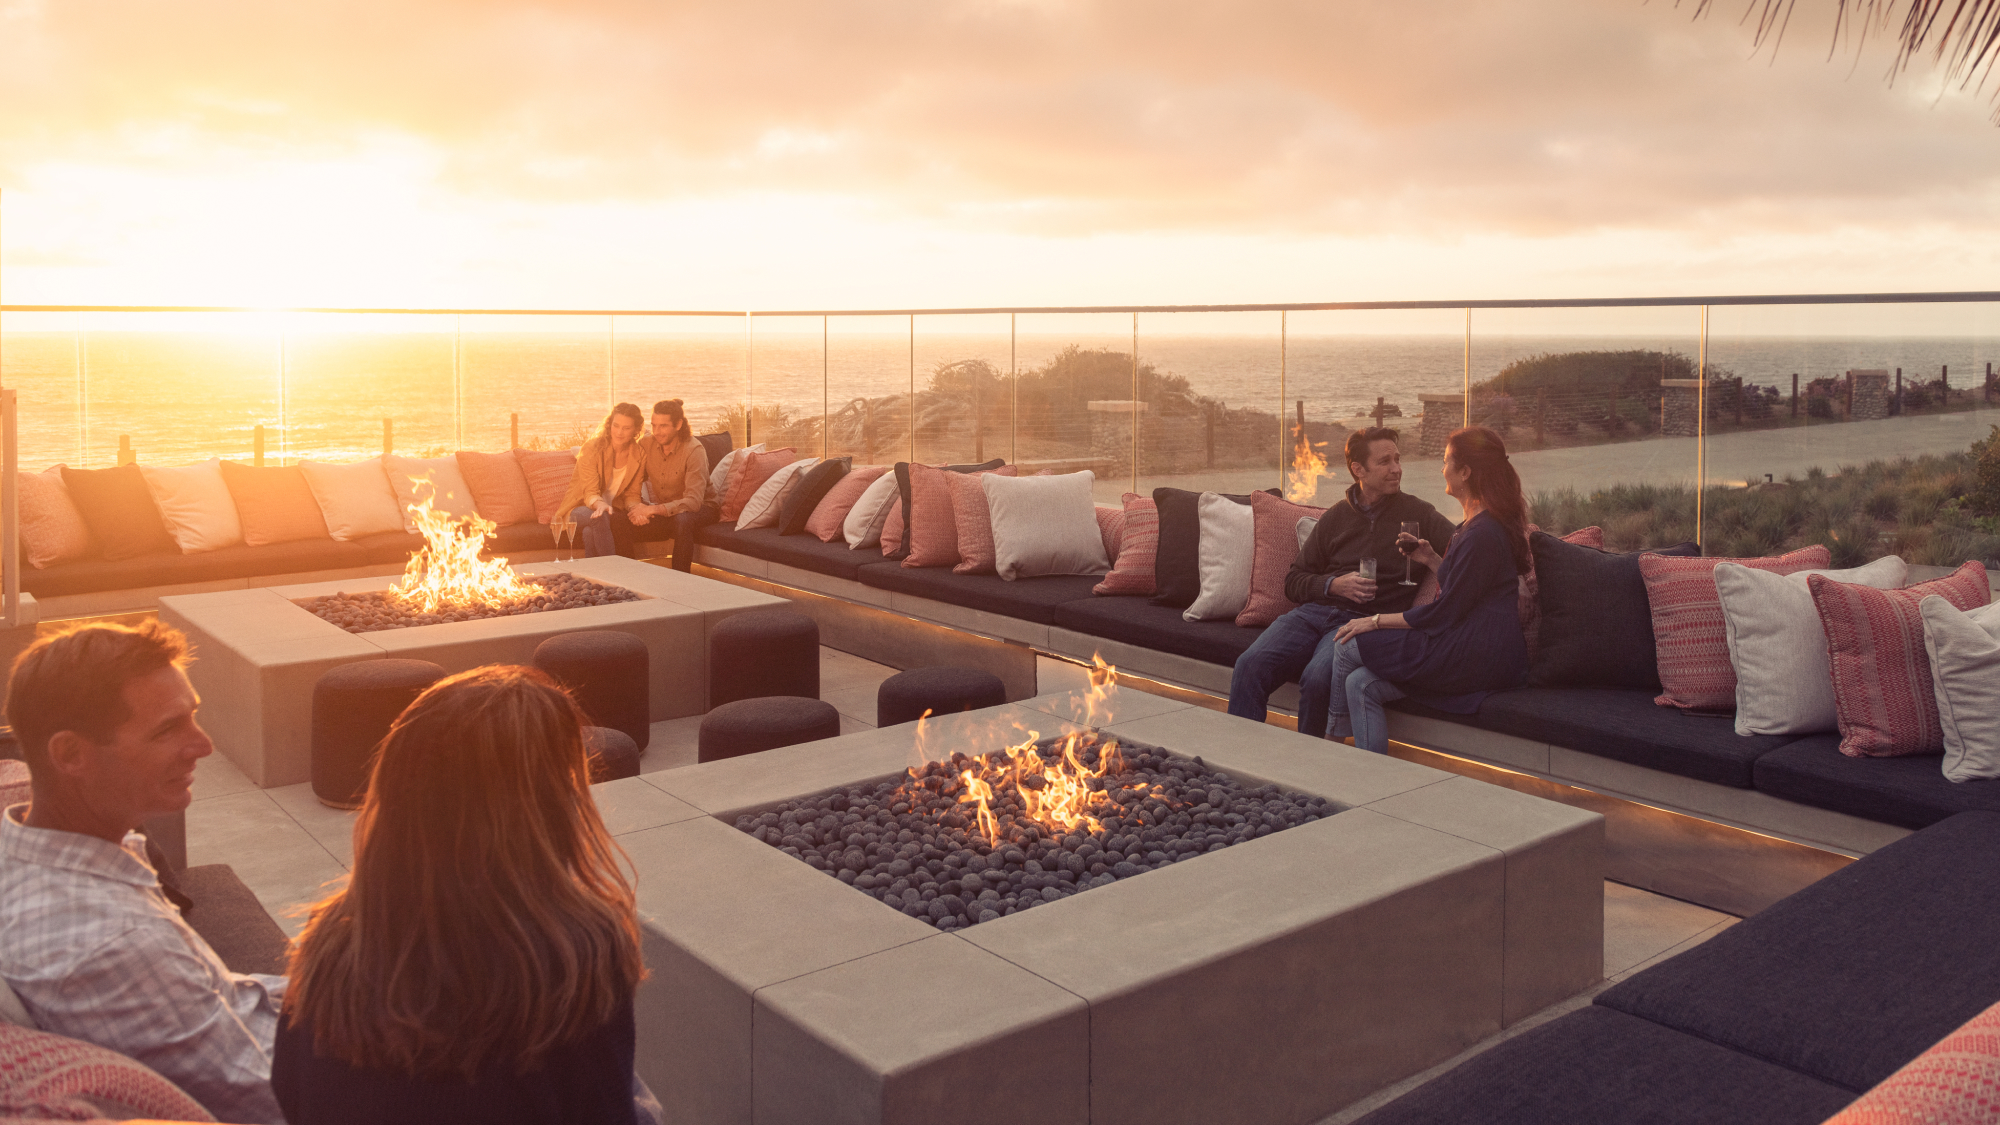 couples sitting by the fire pit at sunset